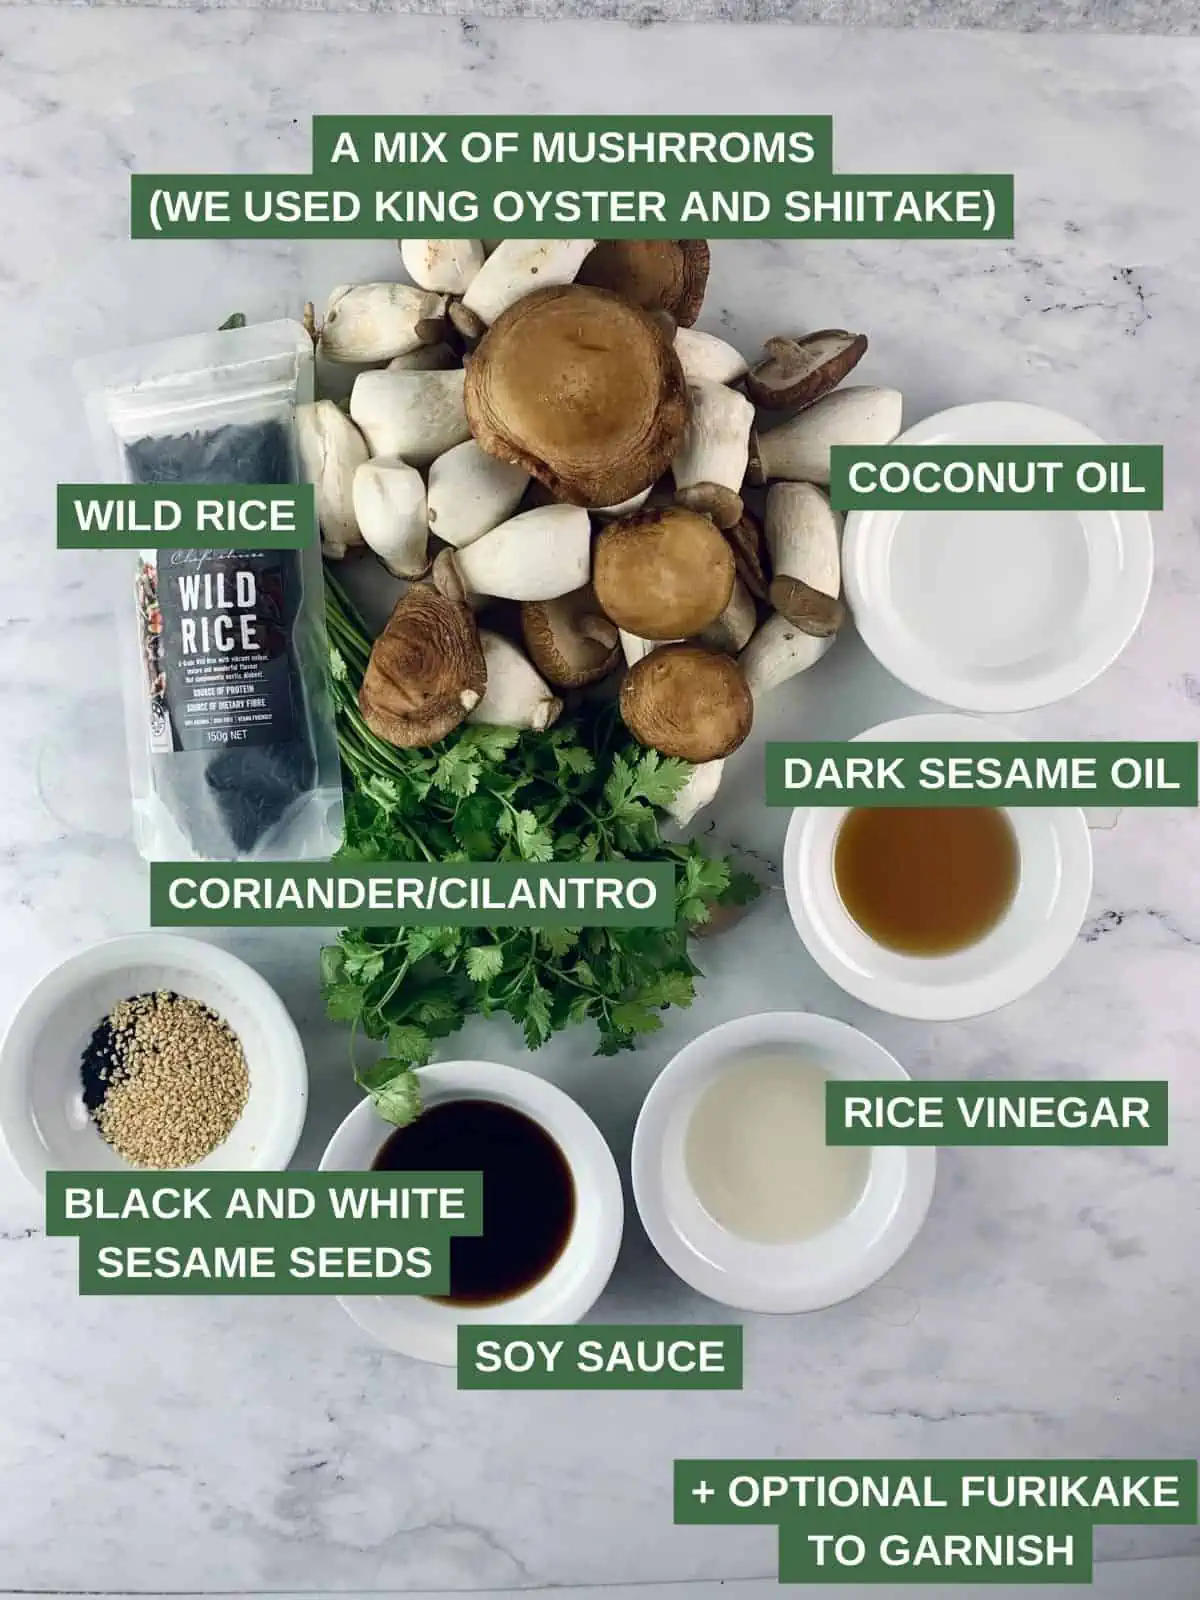 Labelled ingredients needed to make a wild rice salad with asian mushrooms.